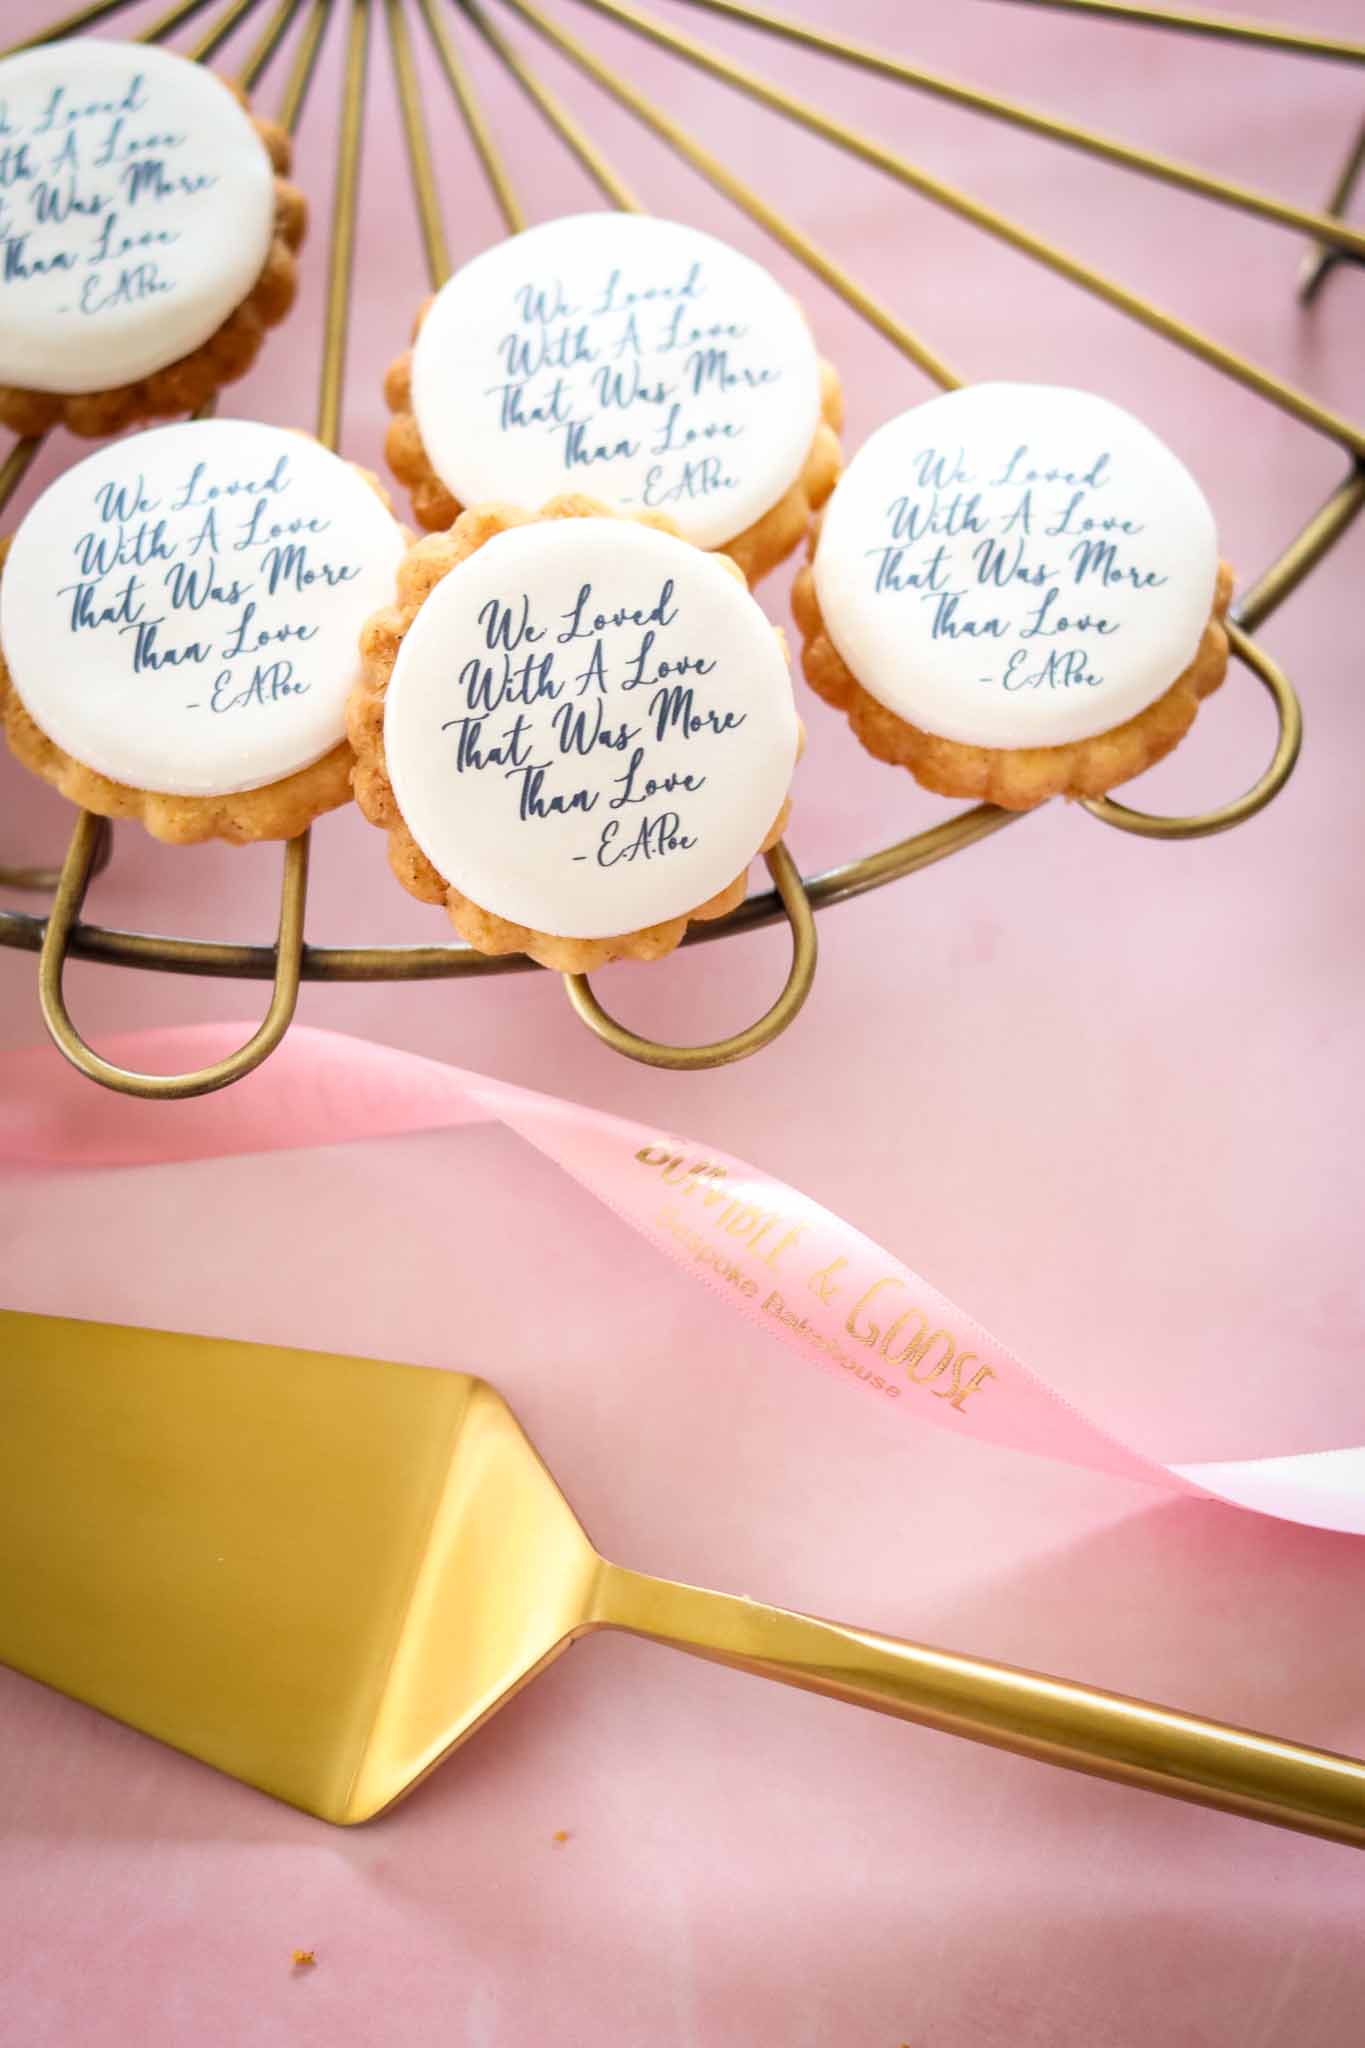 wedding biscuits with quotes